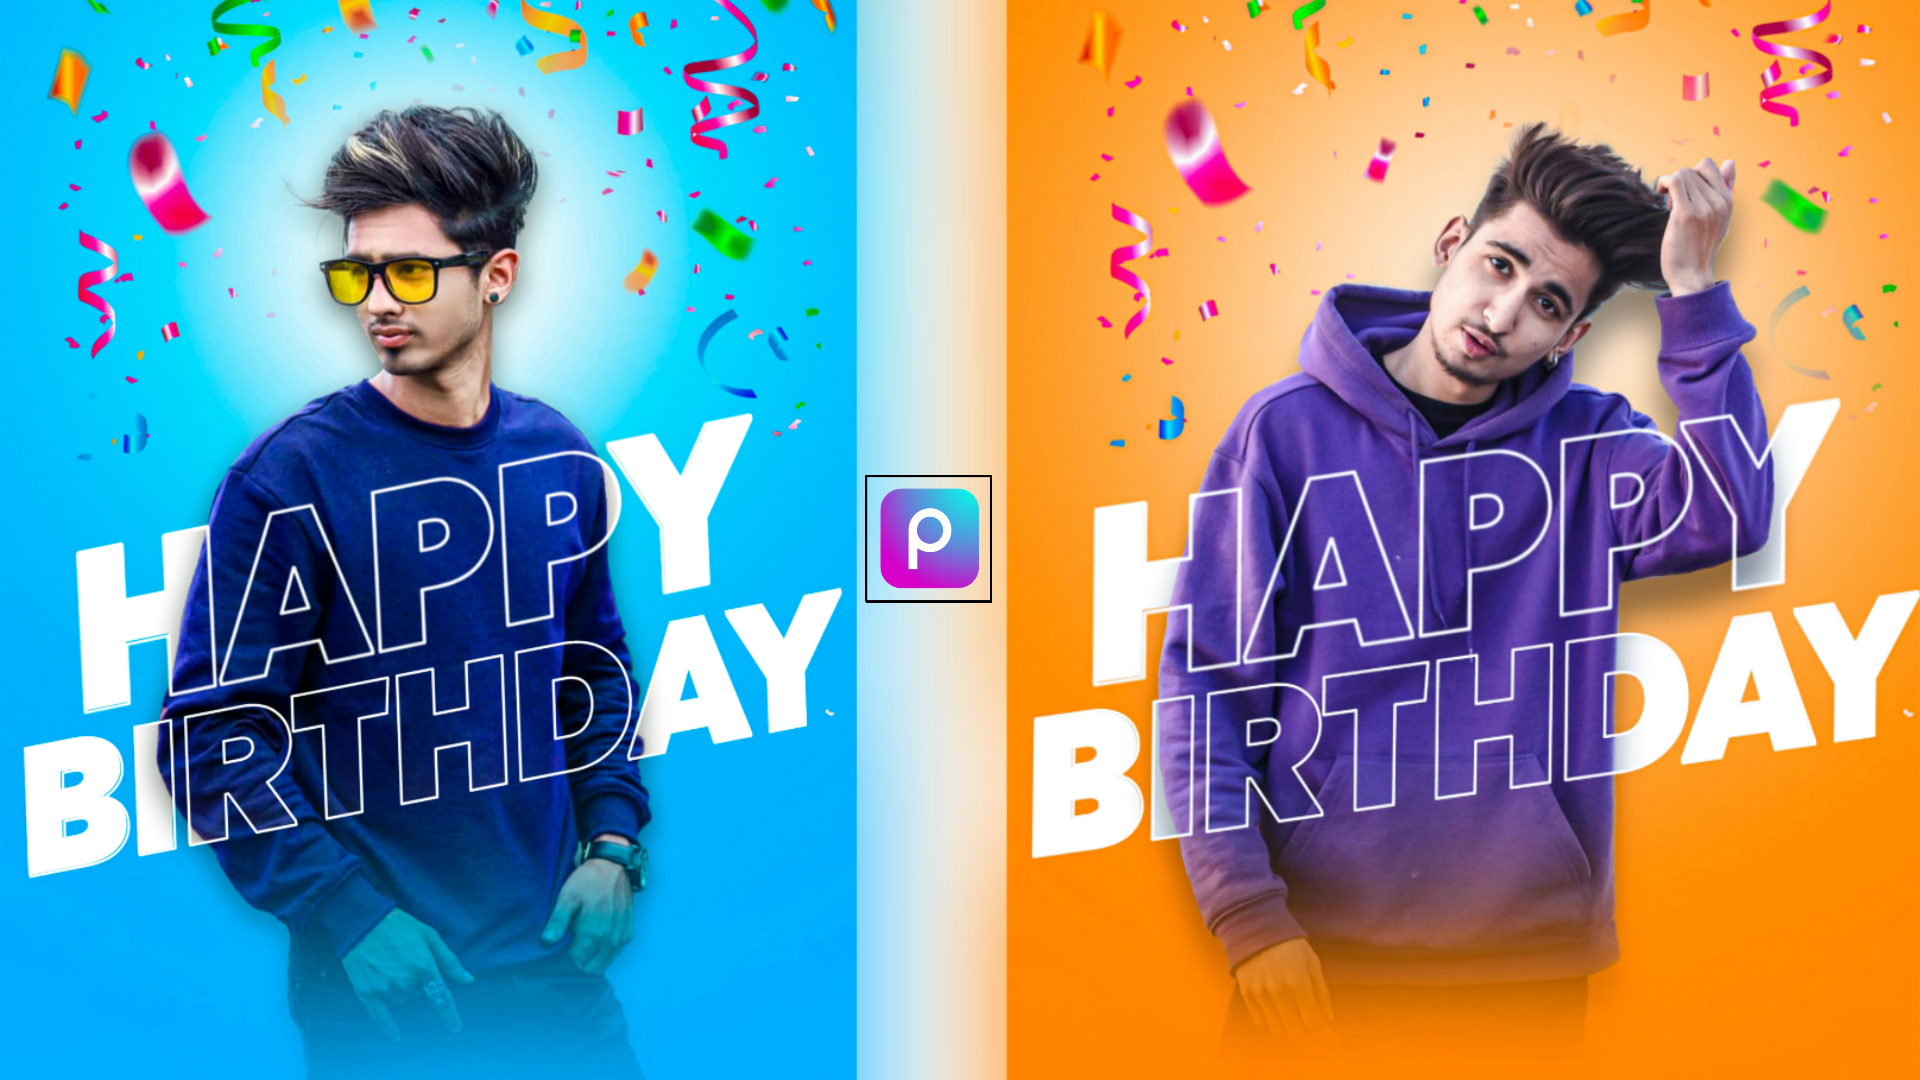 Happy birthday background and png download - DJ PHOTO EDITING